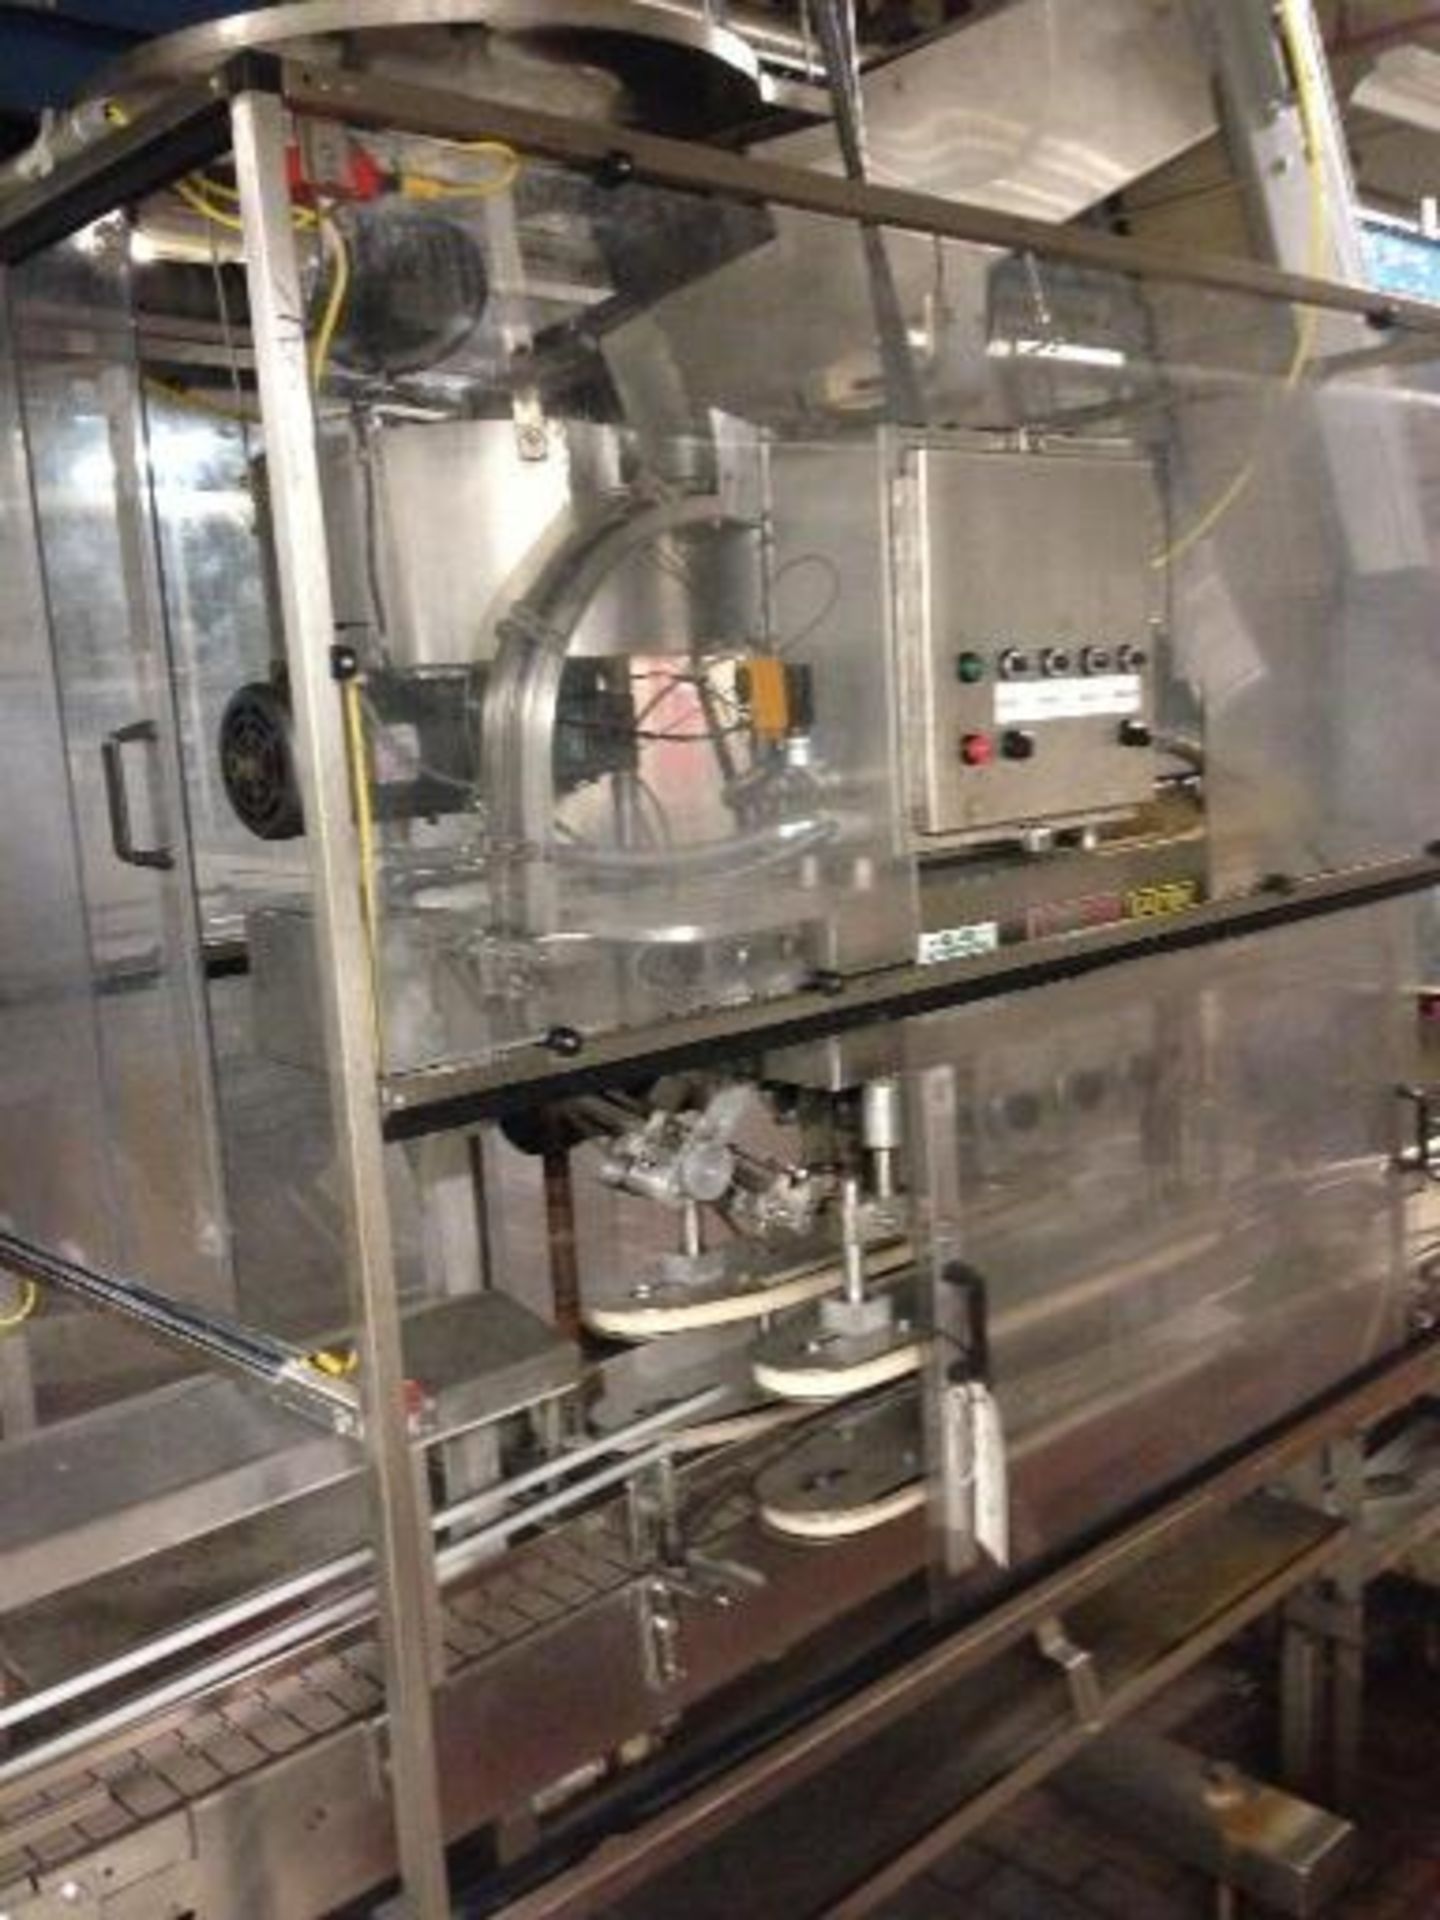 Capper Kaps-All model number A-2 s/n 3631 with cap feeder and 8 foot bottle conveyor infeed CAG - Image 2 of 9